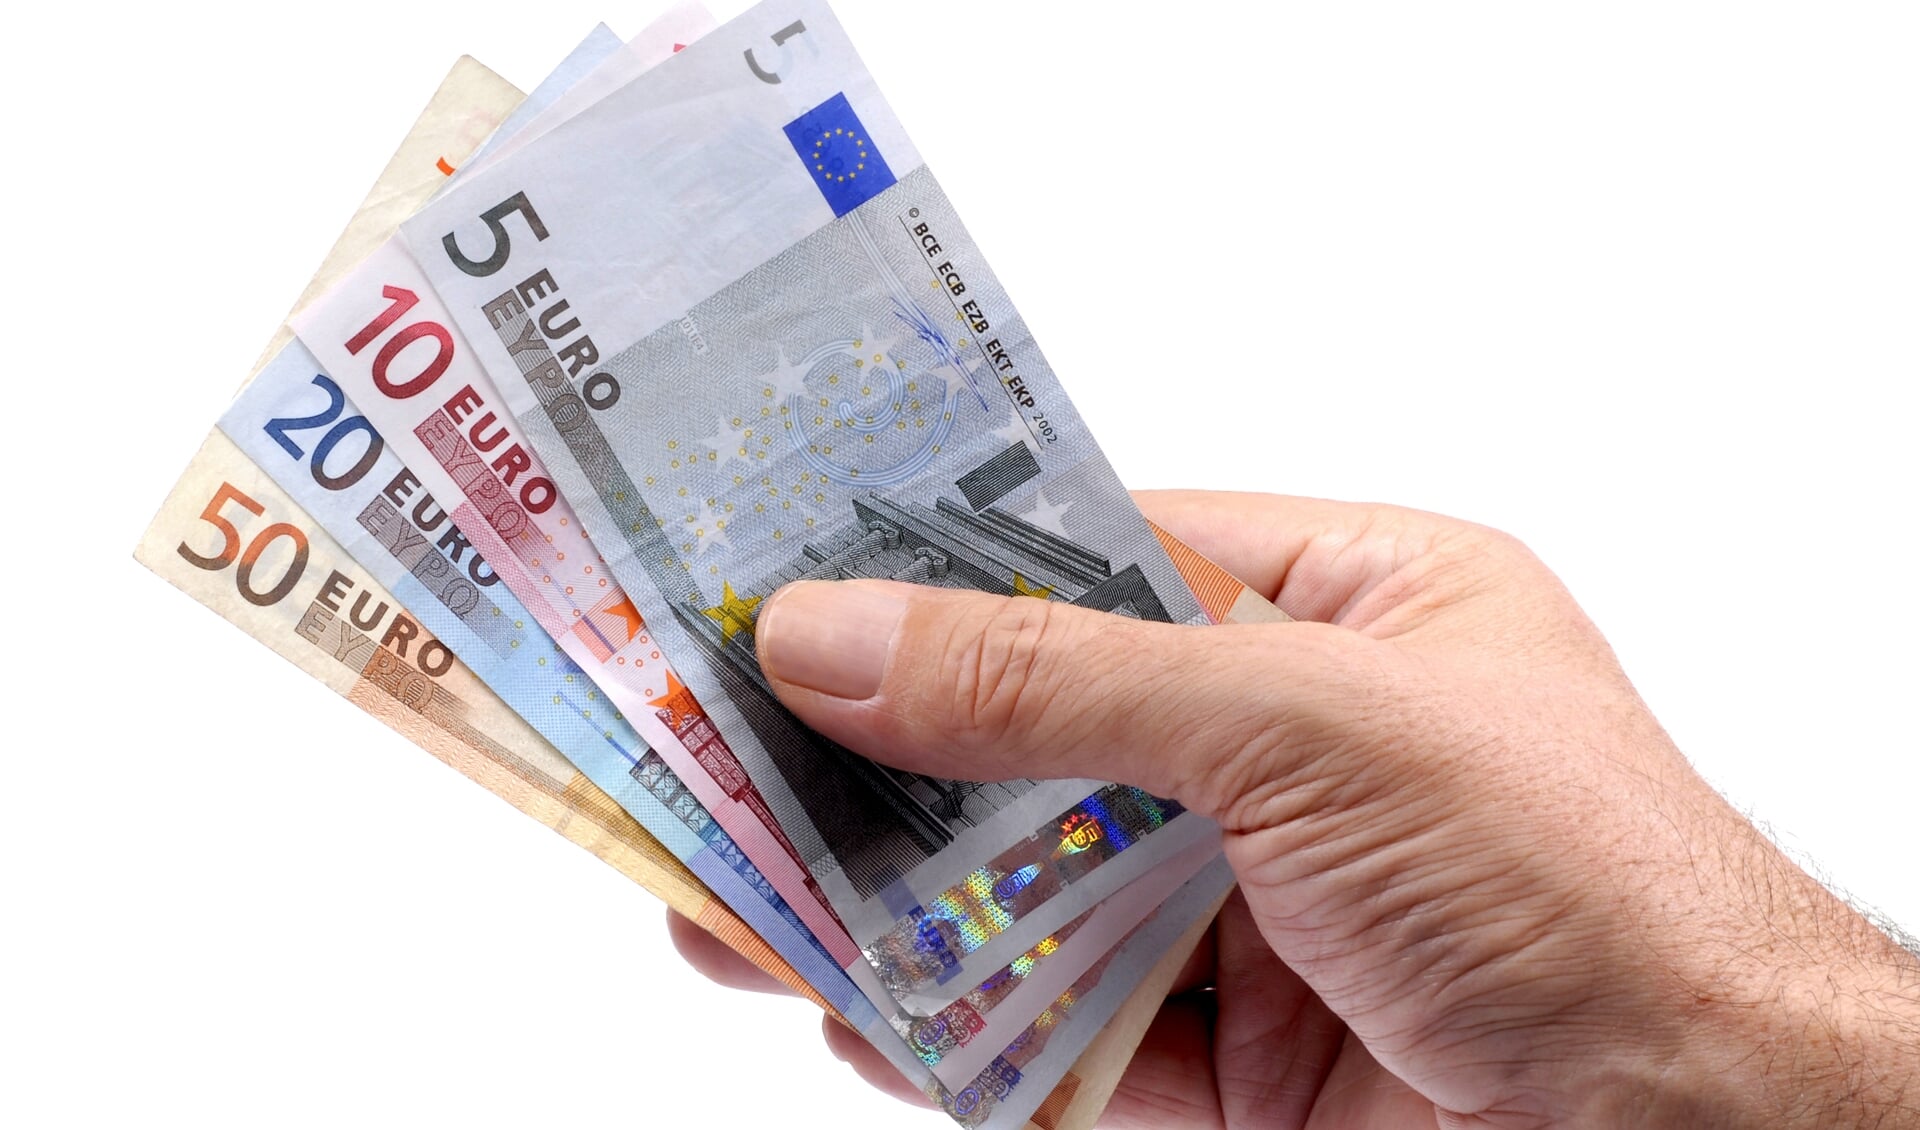 Selection of euro notes held in a male hand isolated on a white background.